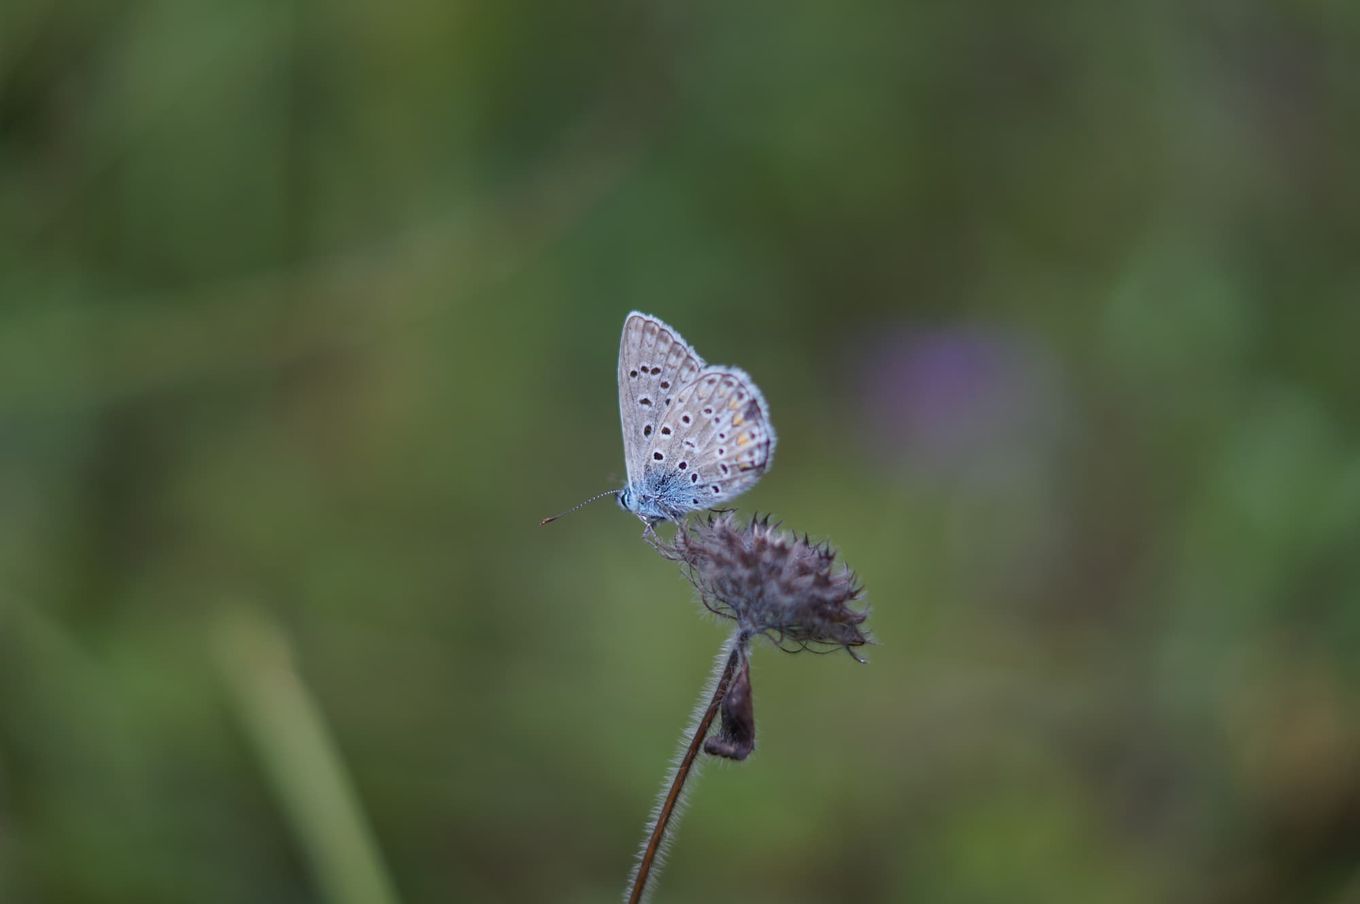 Close-up with unfocused background of a vibrant large blue butterfly gracefully perched on a delicate flower amidst lush green grass